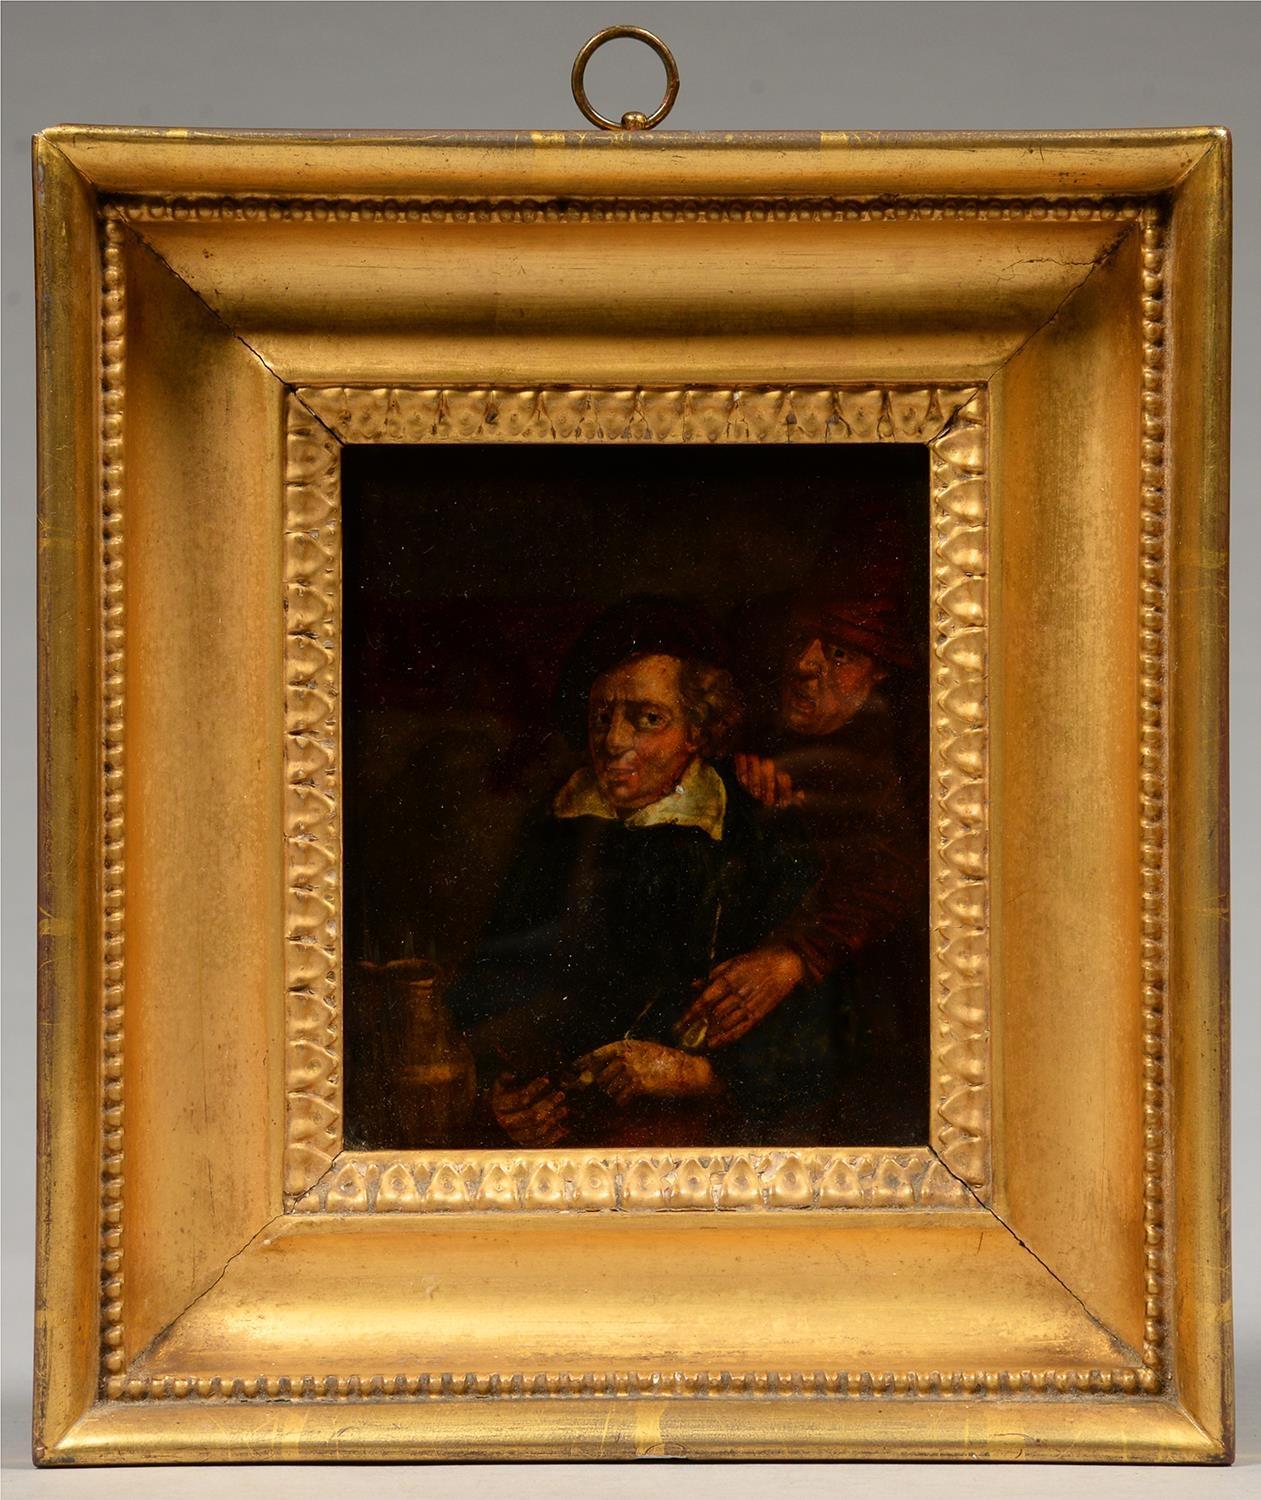 A PAINTED MEZZOTINT UNDER GLASS OF TWO MEN IN A TAVERN AFTER TENIERS, 15 X 12.5CM, LATE 18TH C,